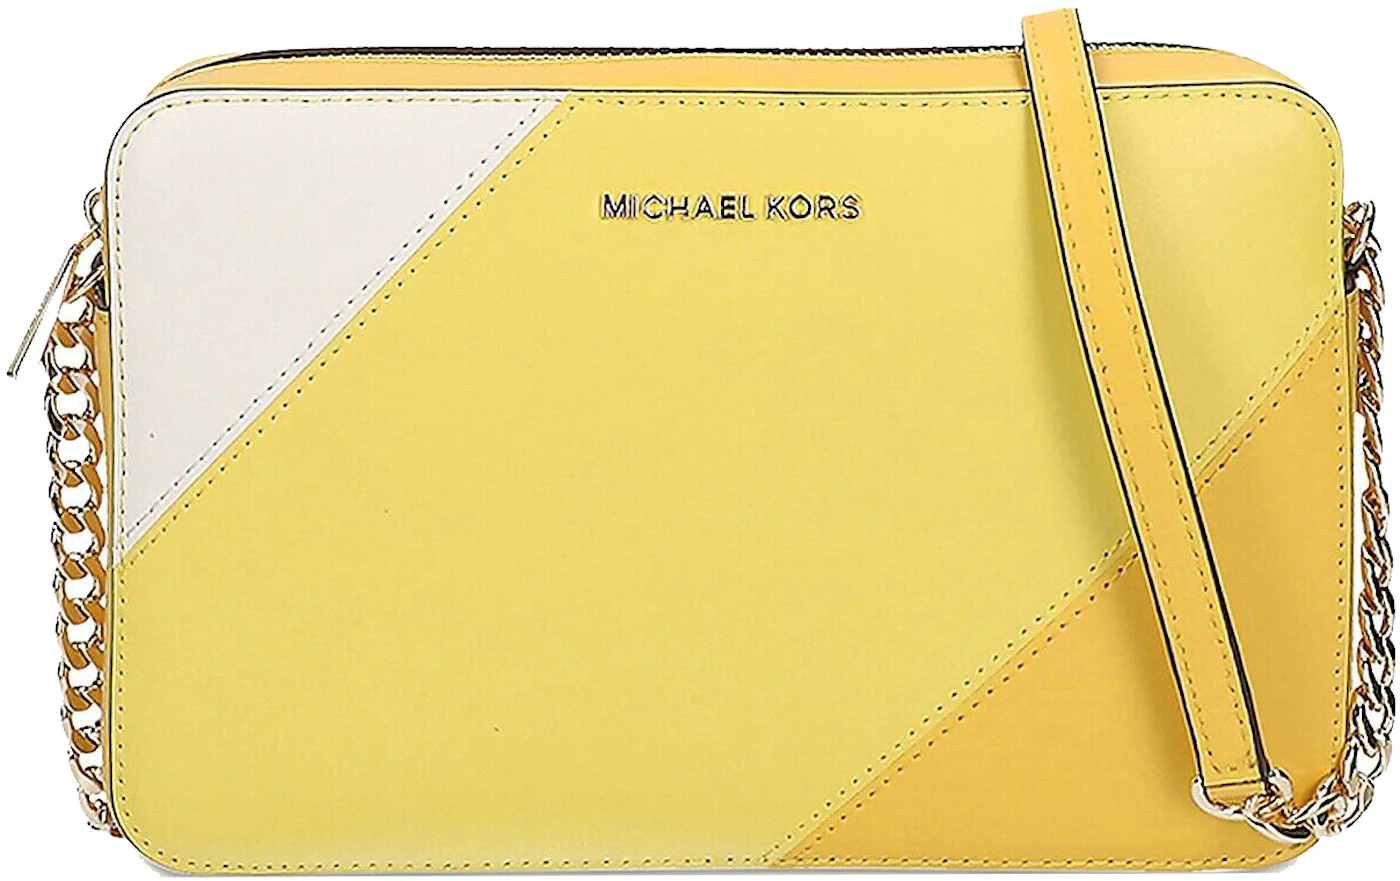 Michael Kors Gusset Crossbody Bag Large Yellow in PVC/Leather with